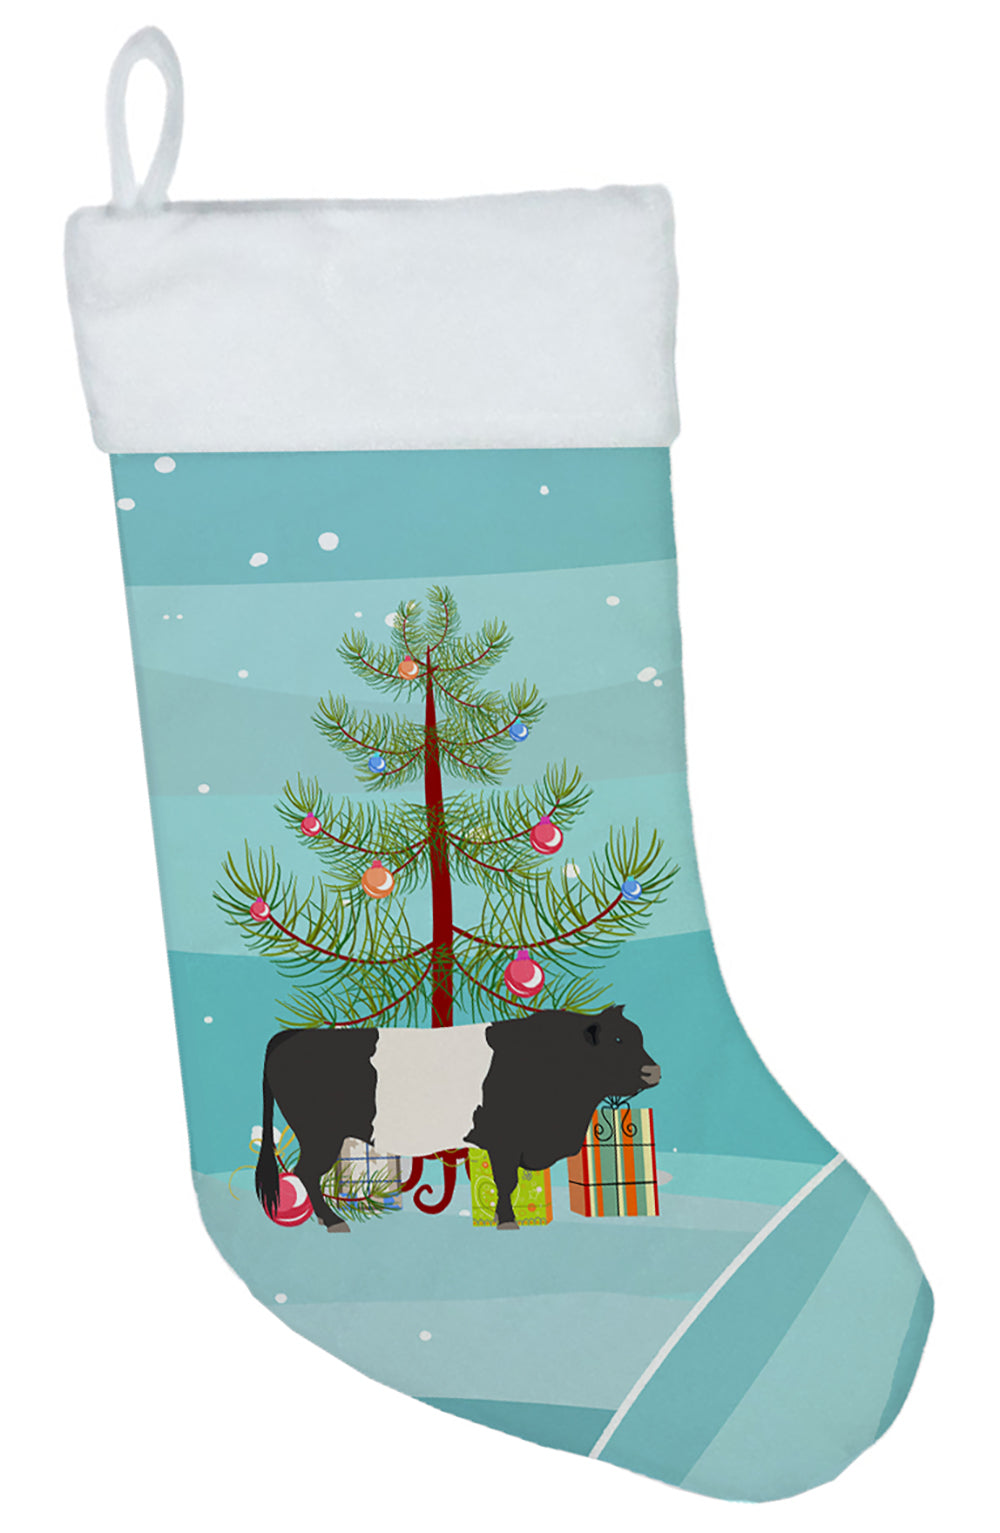 Belted Galloway Cow Christmas Christmas Stocking BB9198CS